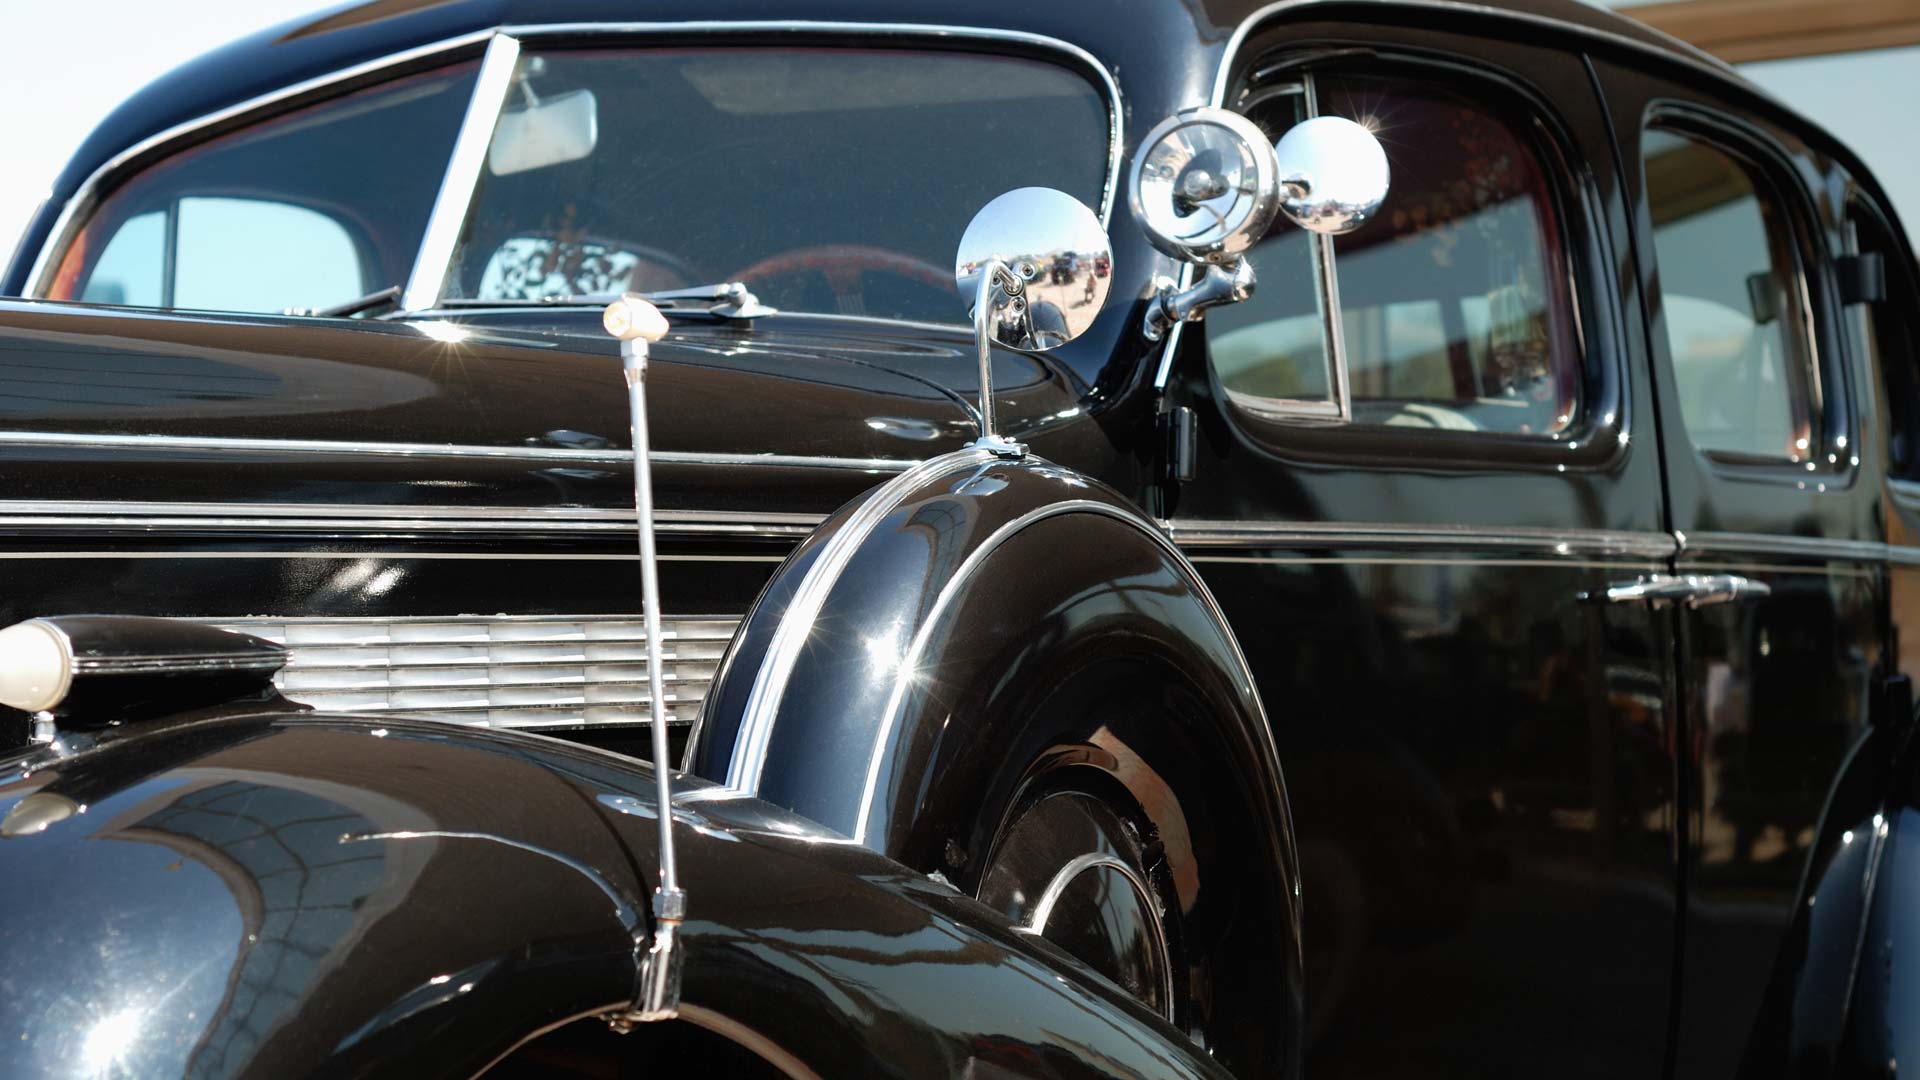 Popular cars from the 1930s